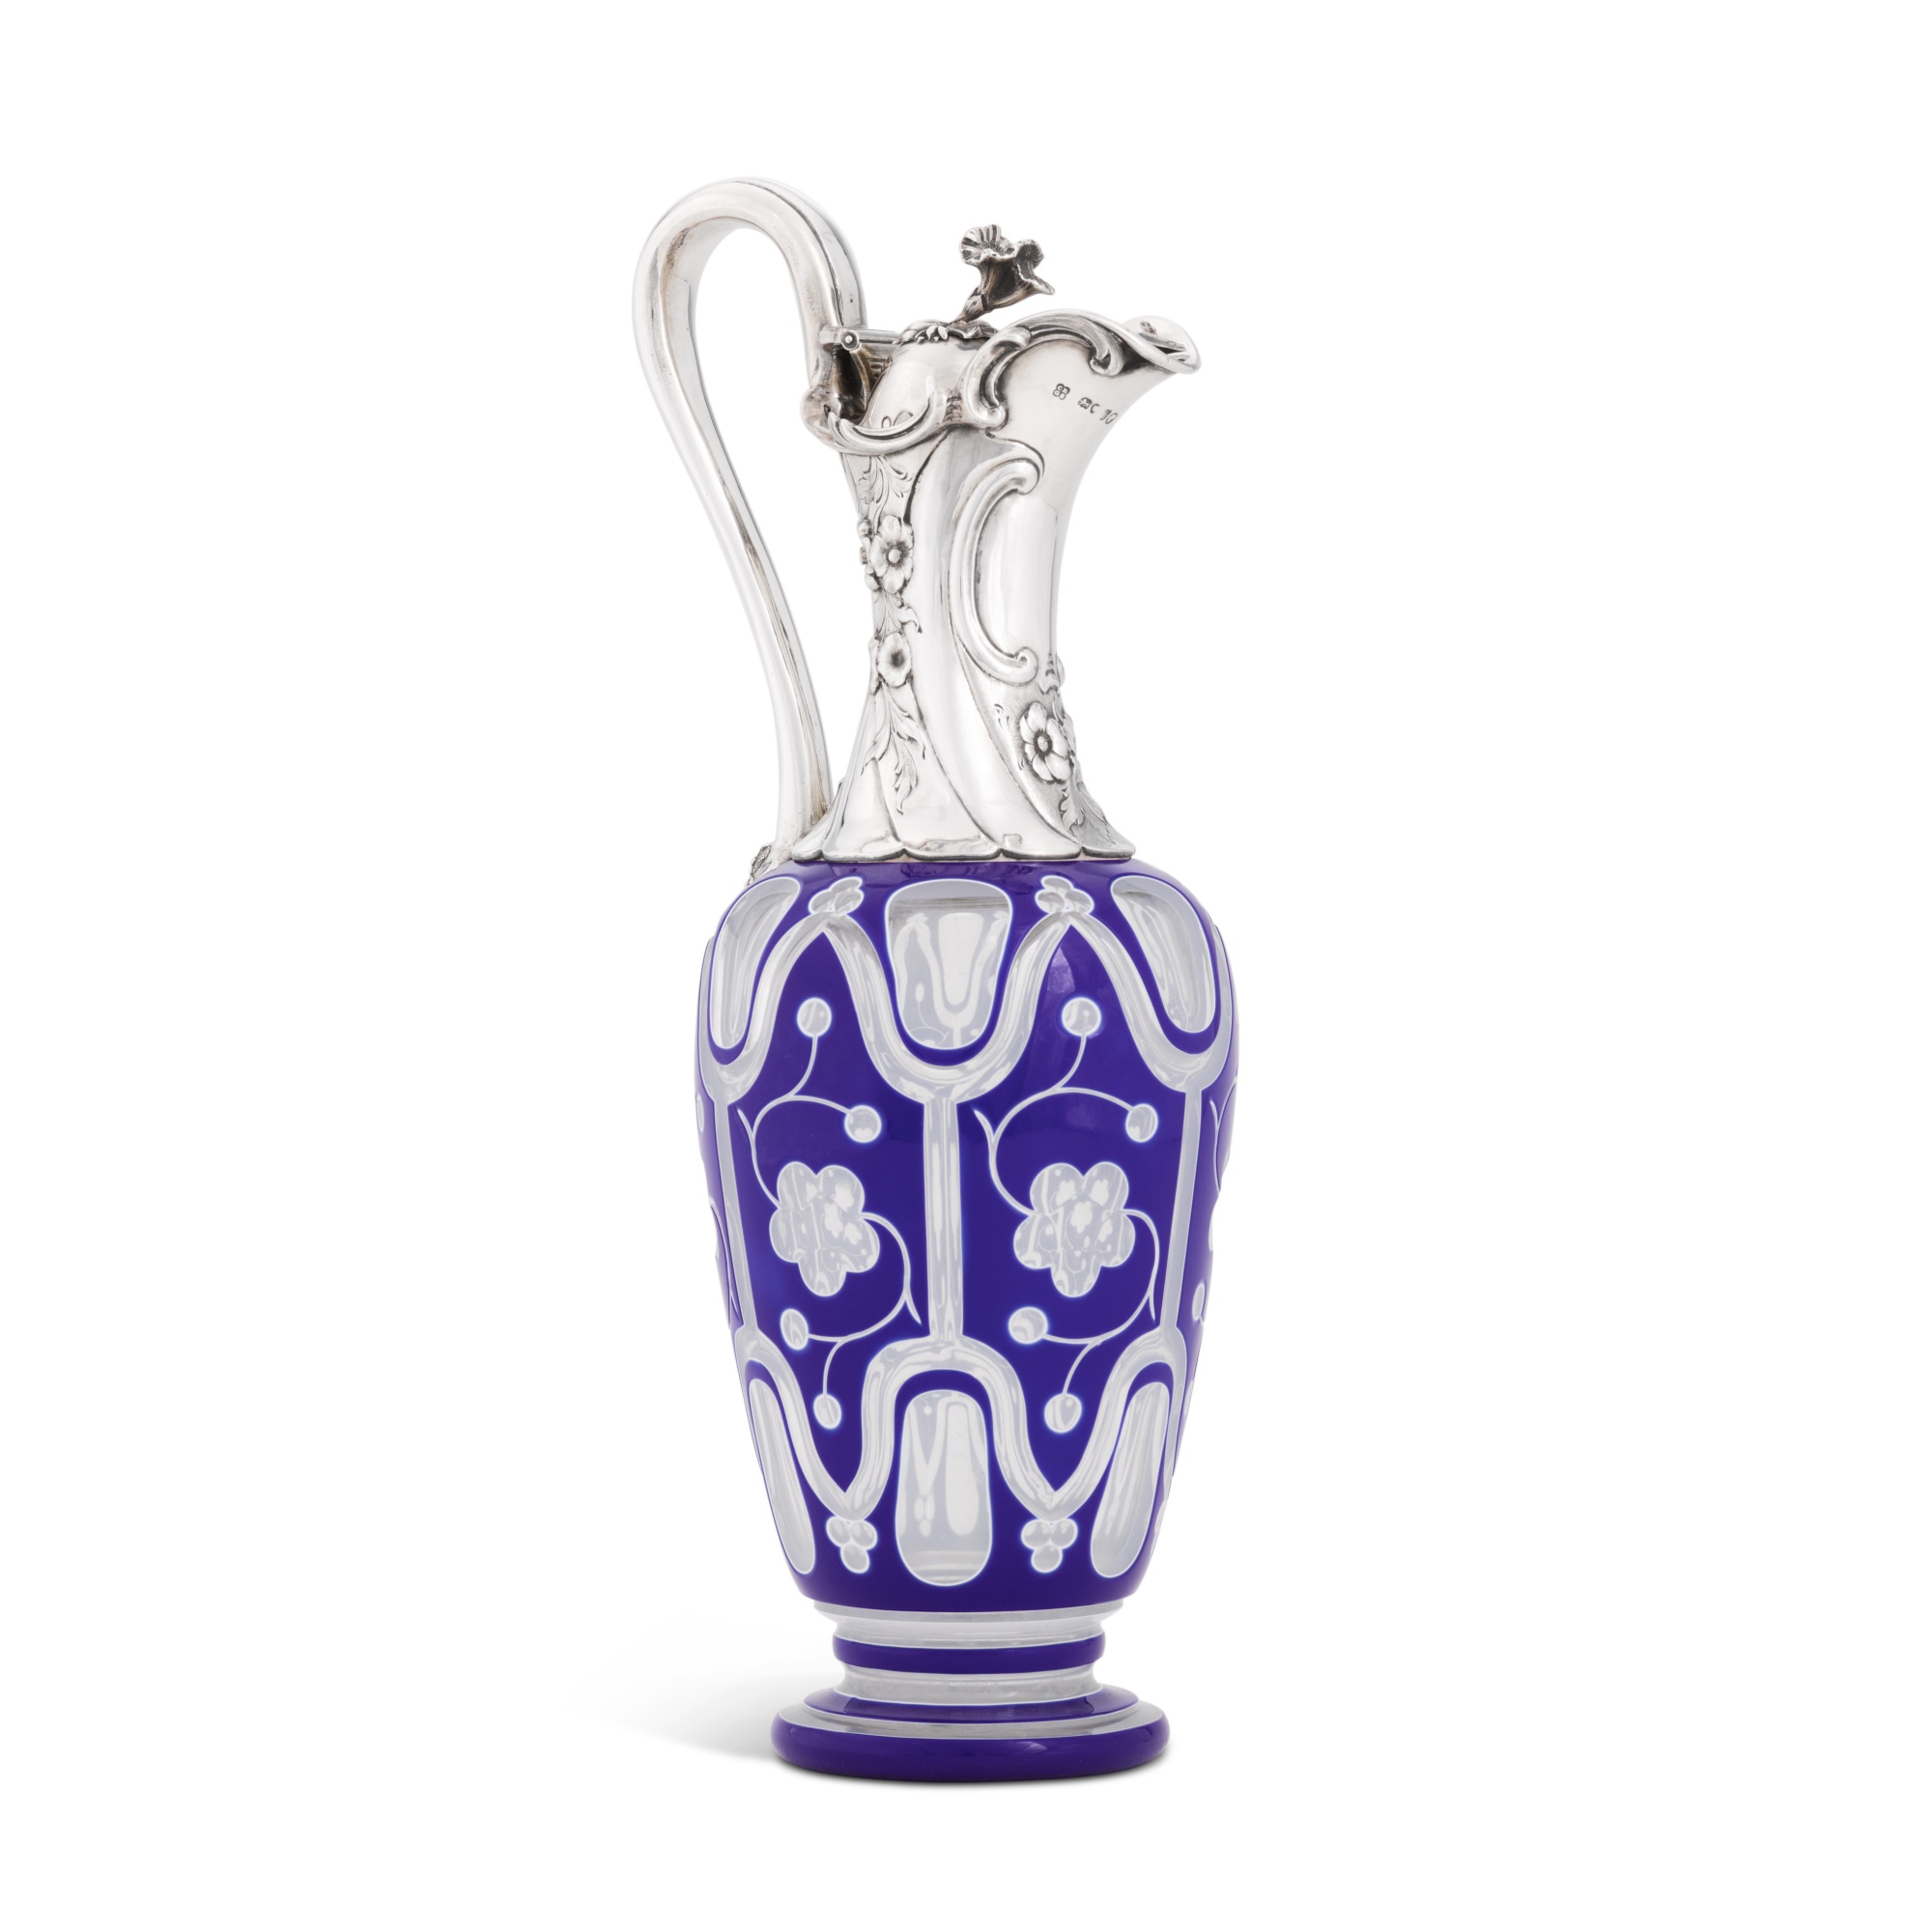 A Victorian silver-mounted glass claret jug, Charles Reily & George Storer, London, 1845